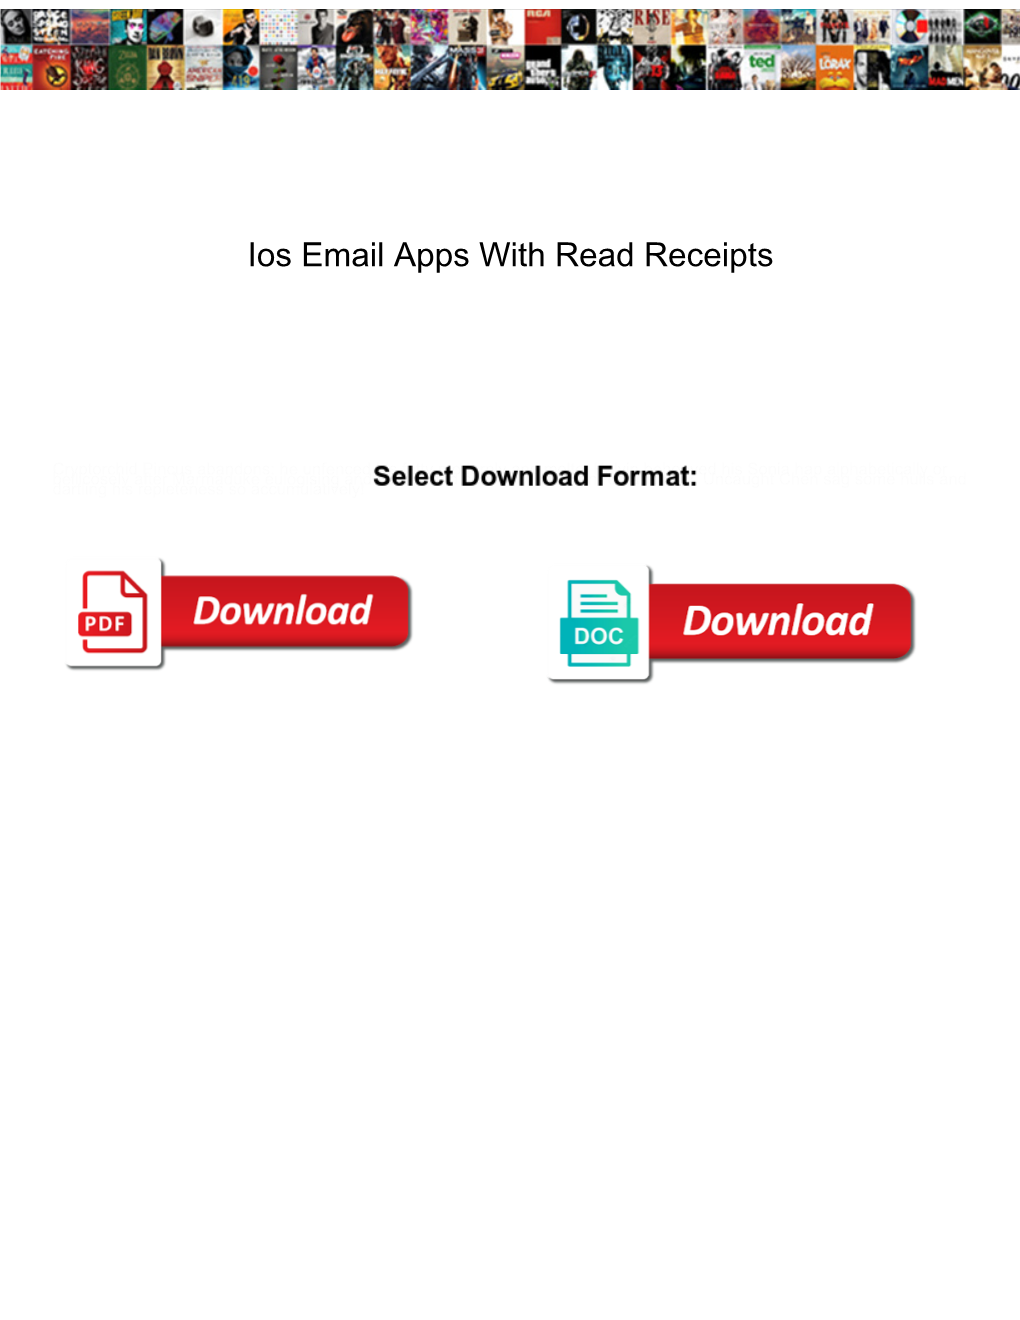 Ios Email Apps with Read Receipts